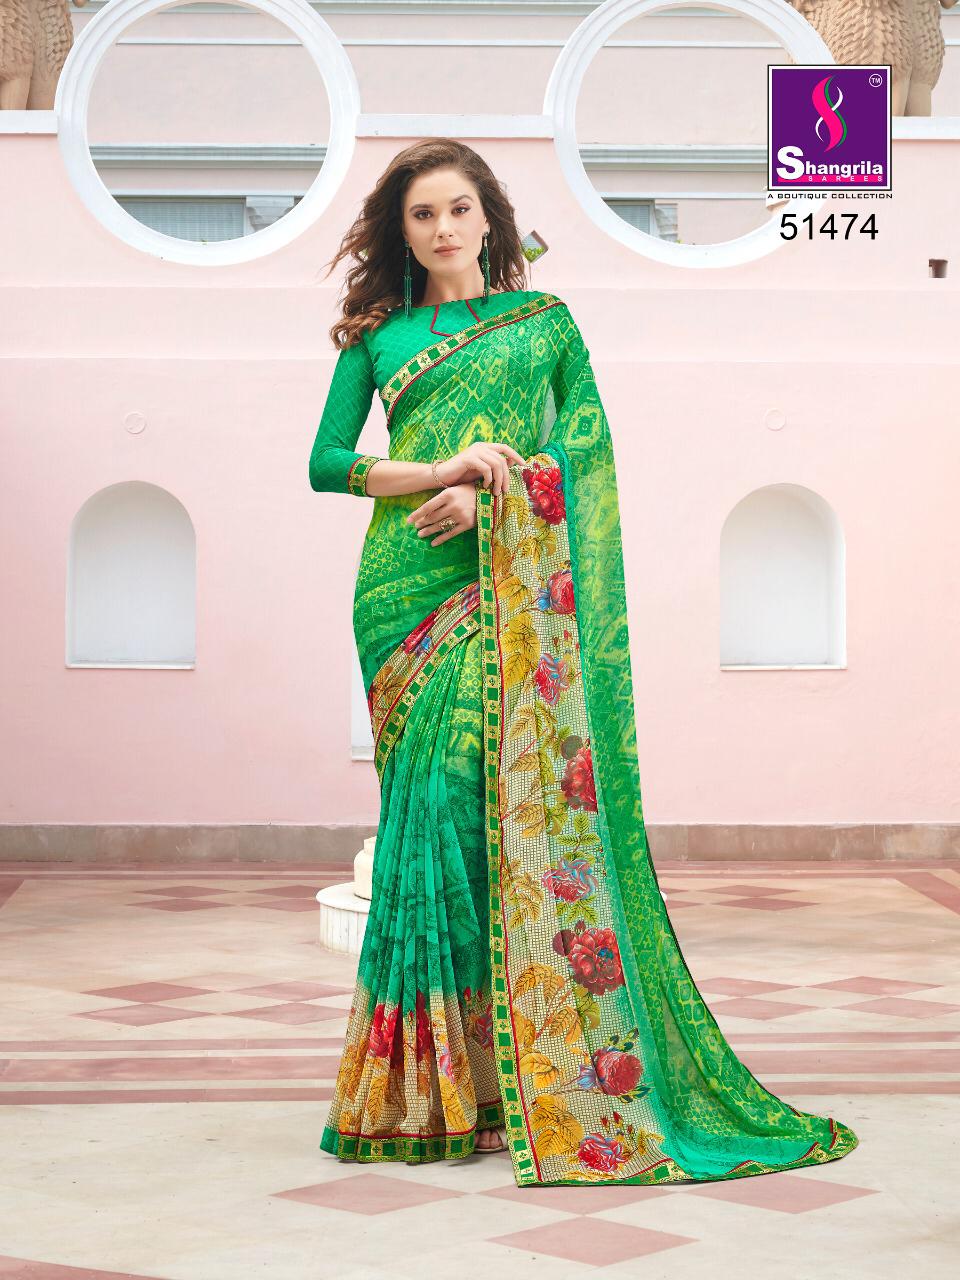 Shangrila fortune vol-2 beautiful collection of sarees in factory rates